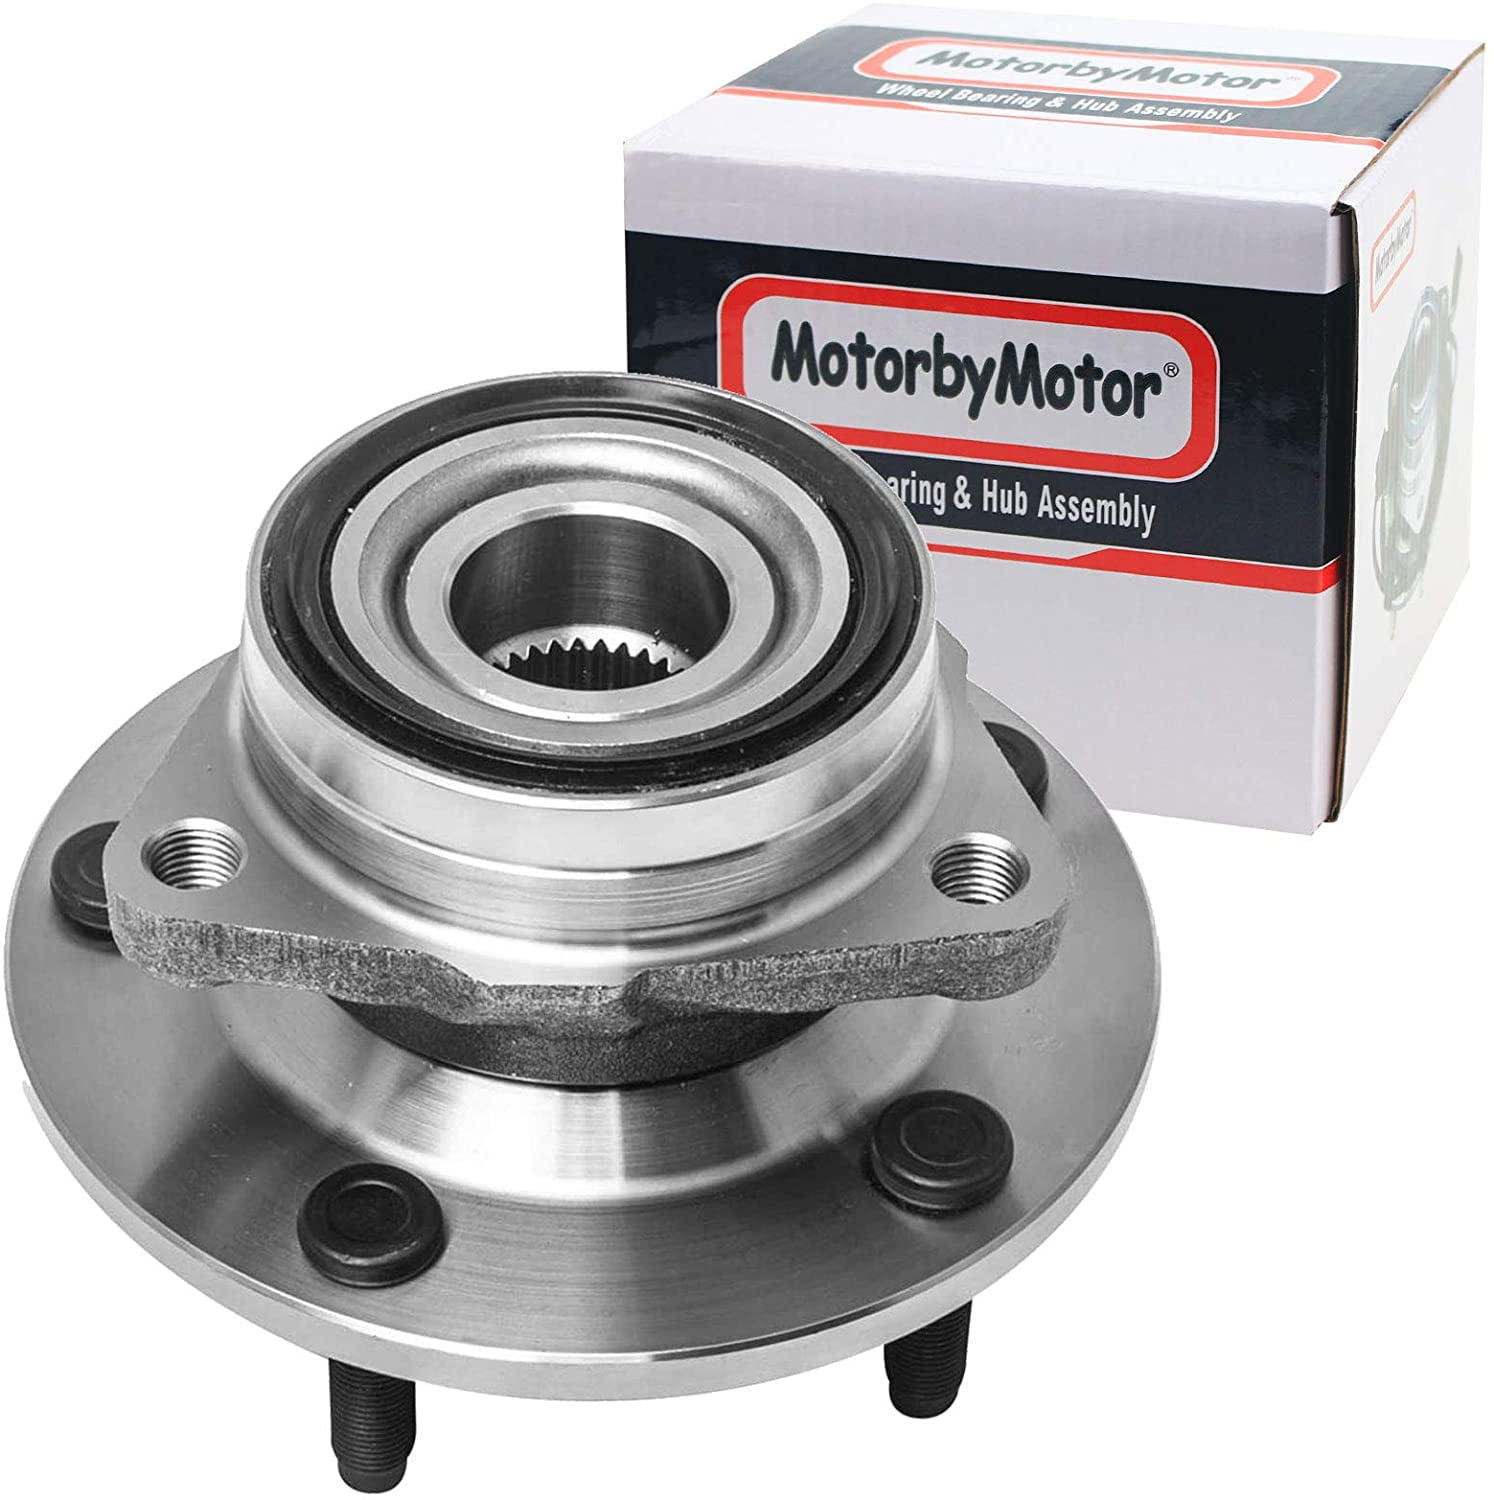 Detroit Axle 515006 Front Wheel Hub and Bearing Assembly for 1994 1995 1996 1997 1998 1999 Dodge Ram 1500 4x4 5-Lug NO ABS 